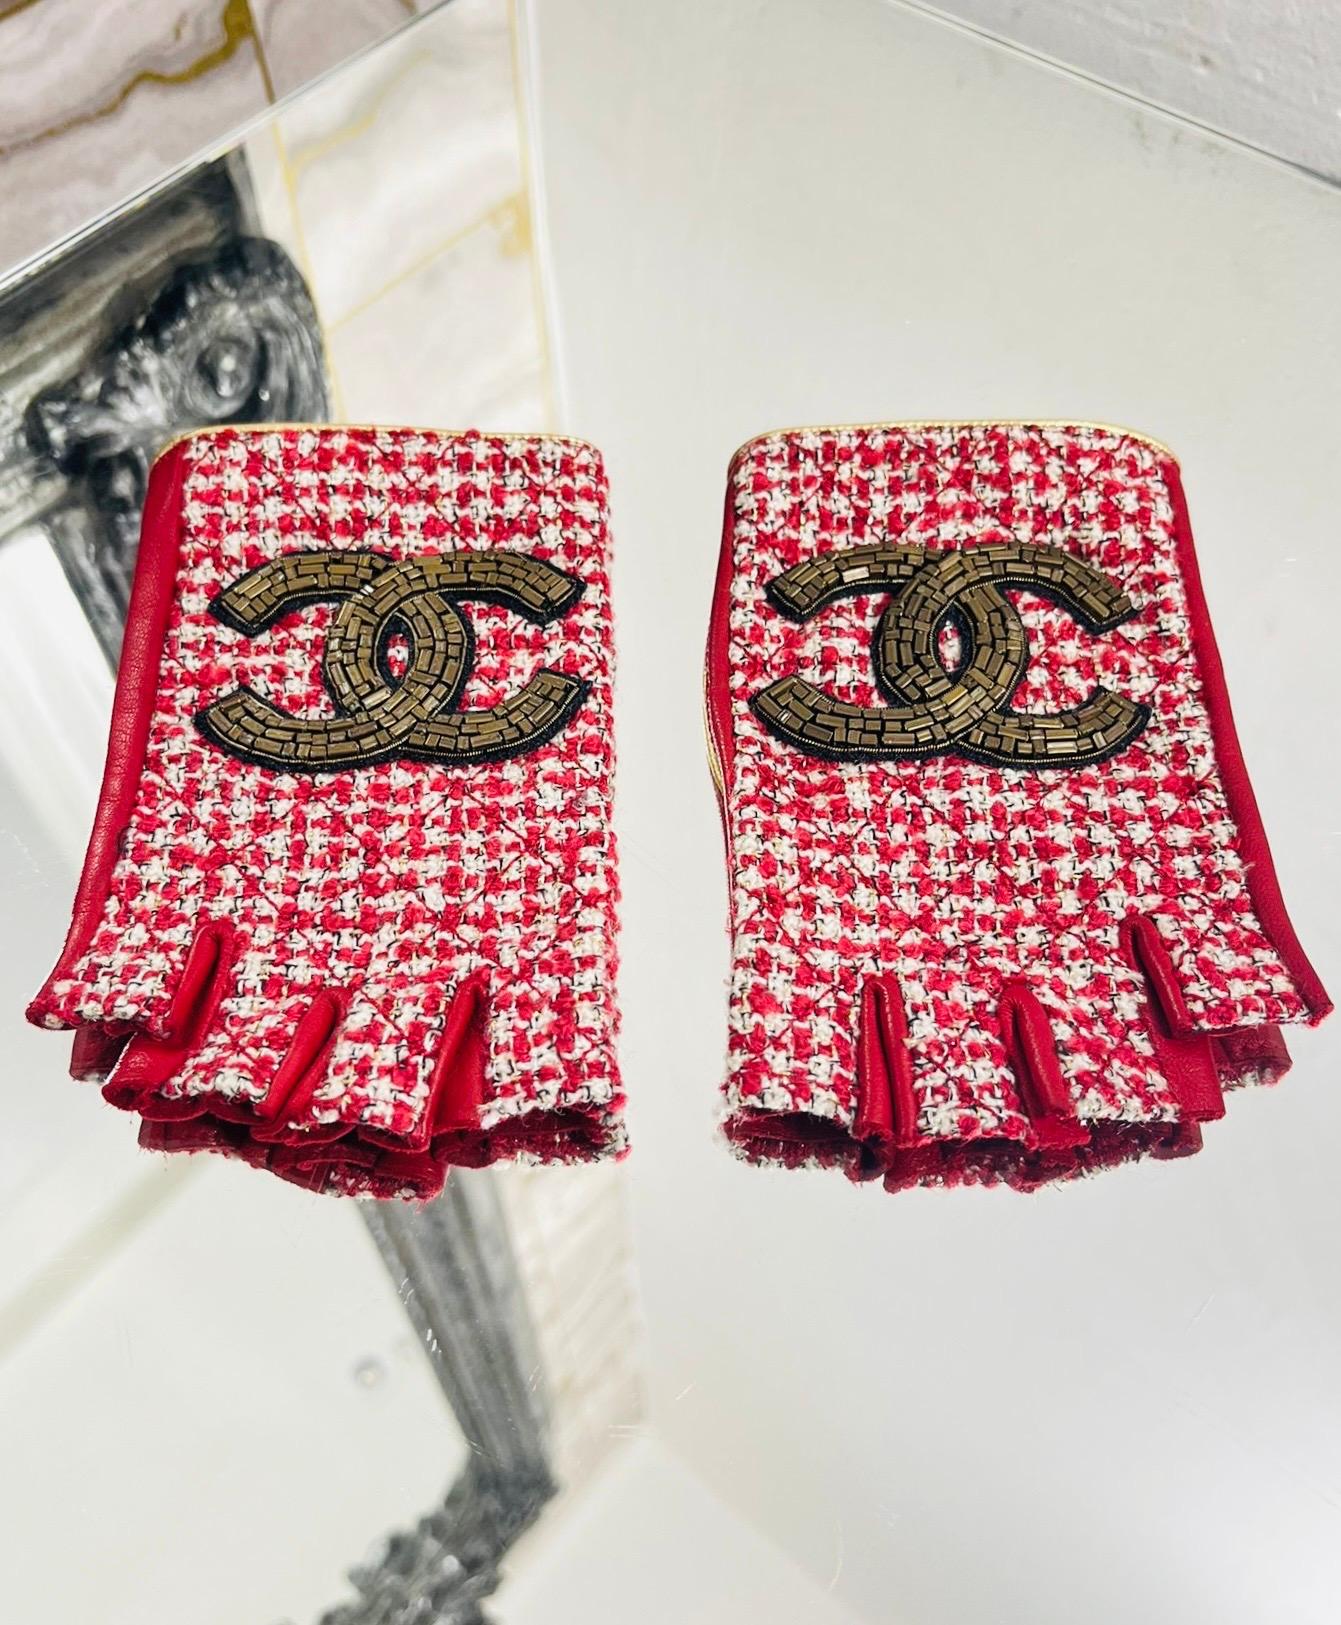 Chanel 'CC' Tweed Leather & Wool Fingerless Gloves

Red gloves crafted from smooth leather to rear and white and red tweed to the front accented with gold threads.

Featuring oversized aged gold beaded 'CC' logo to the centre and gold and red